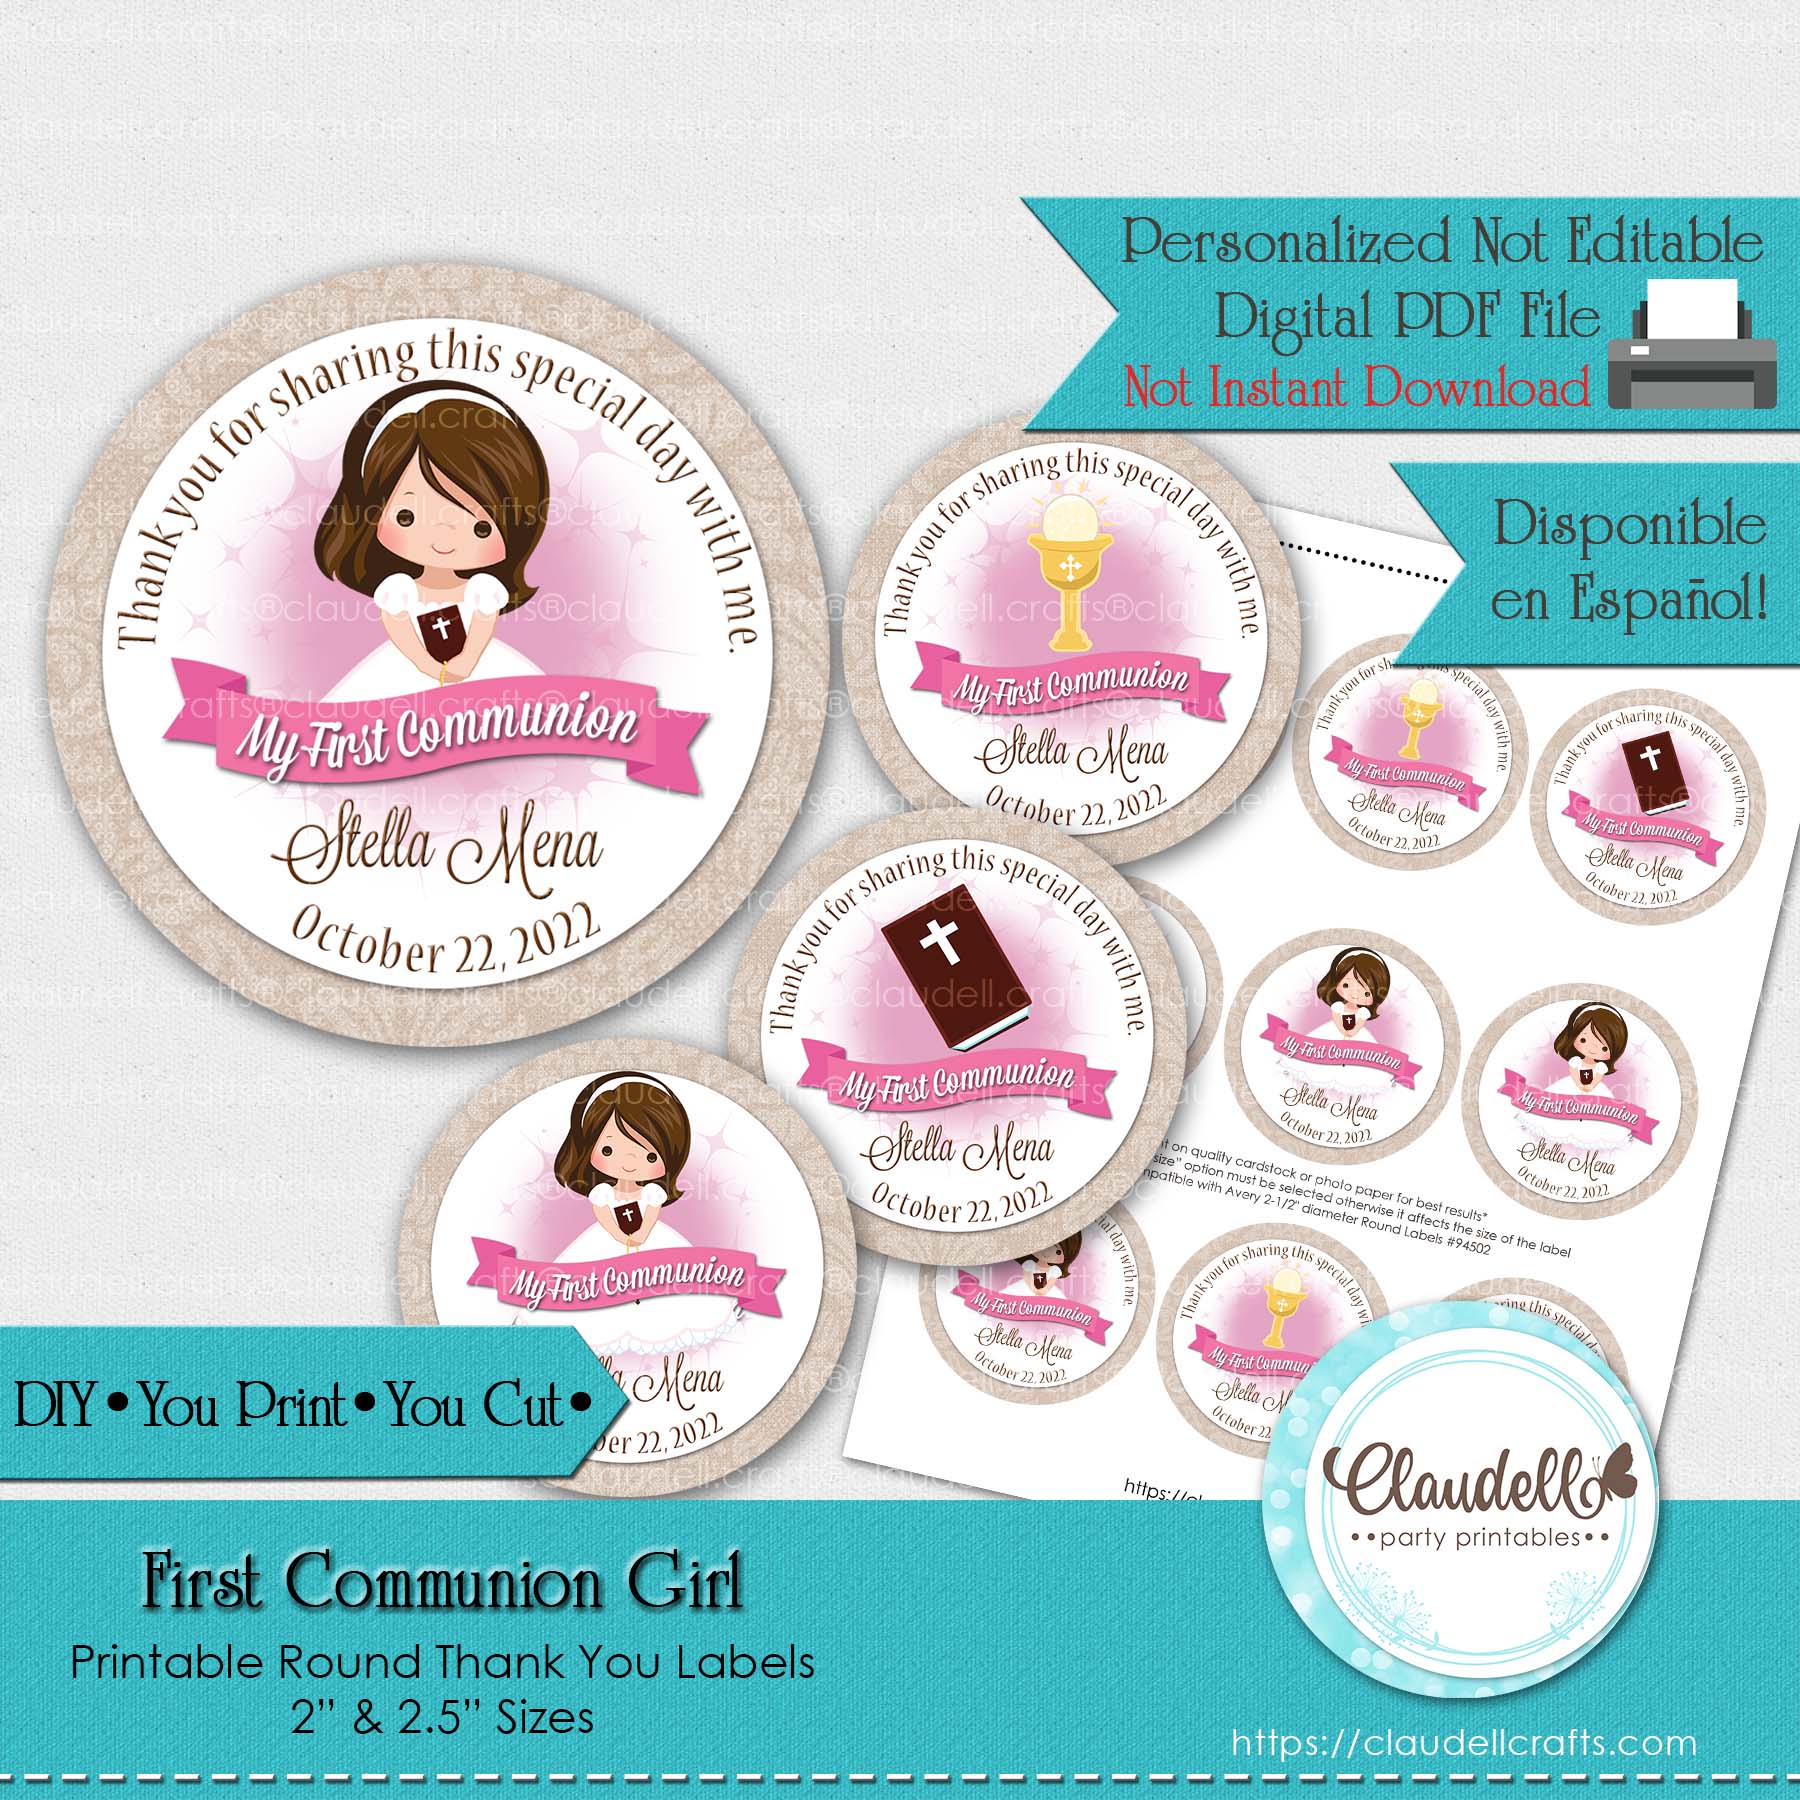 First Communion Girl Printable Round Thank You Labels, Etiqueta Comunión Niña, Communion Personalized Labels, Event Favors/Digital File Only